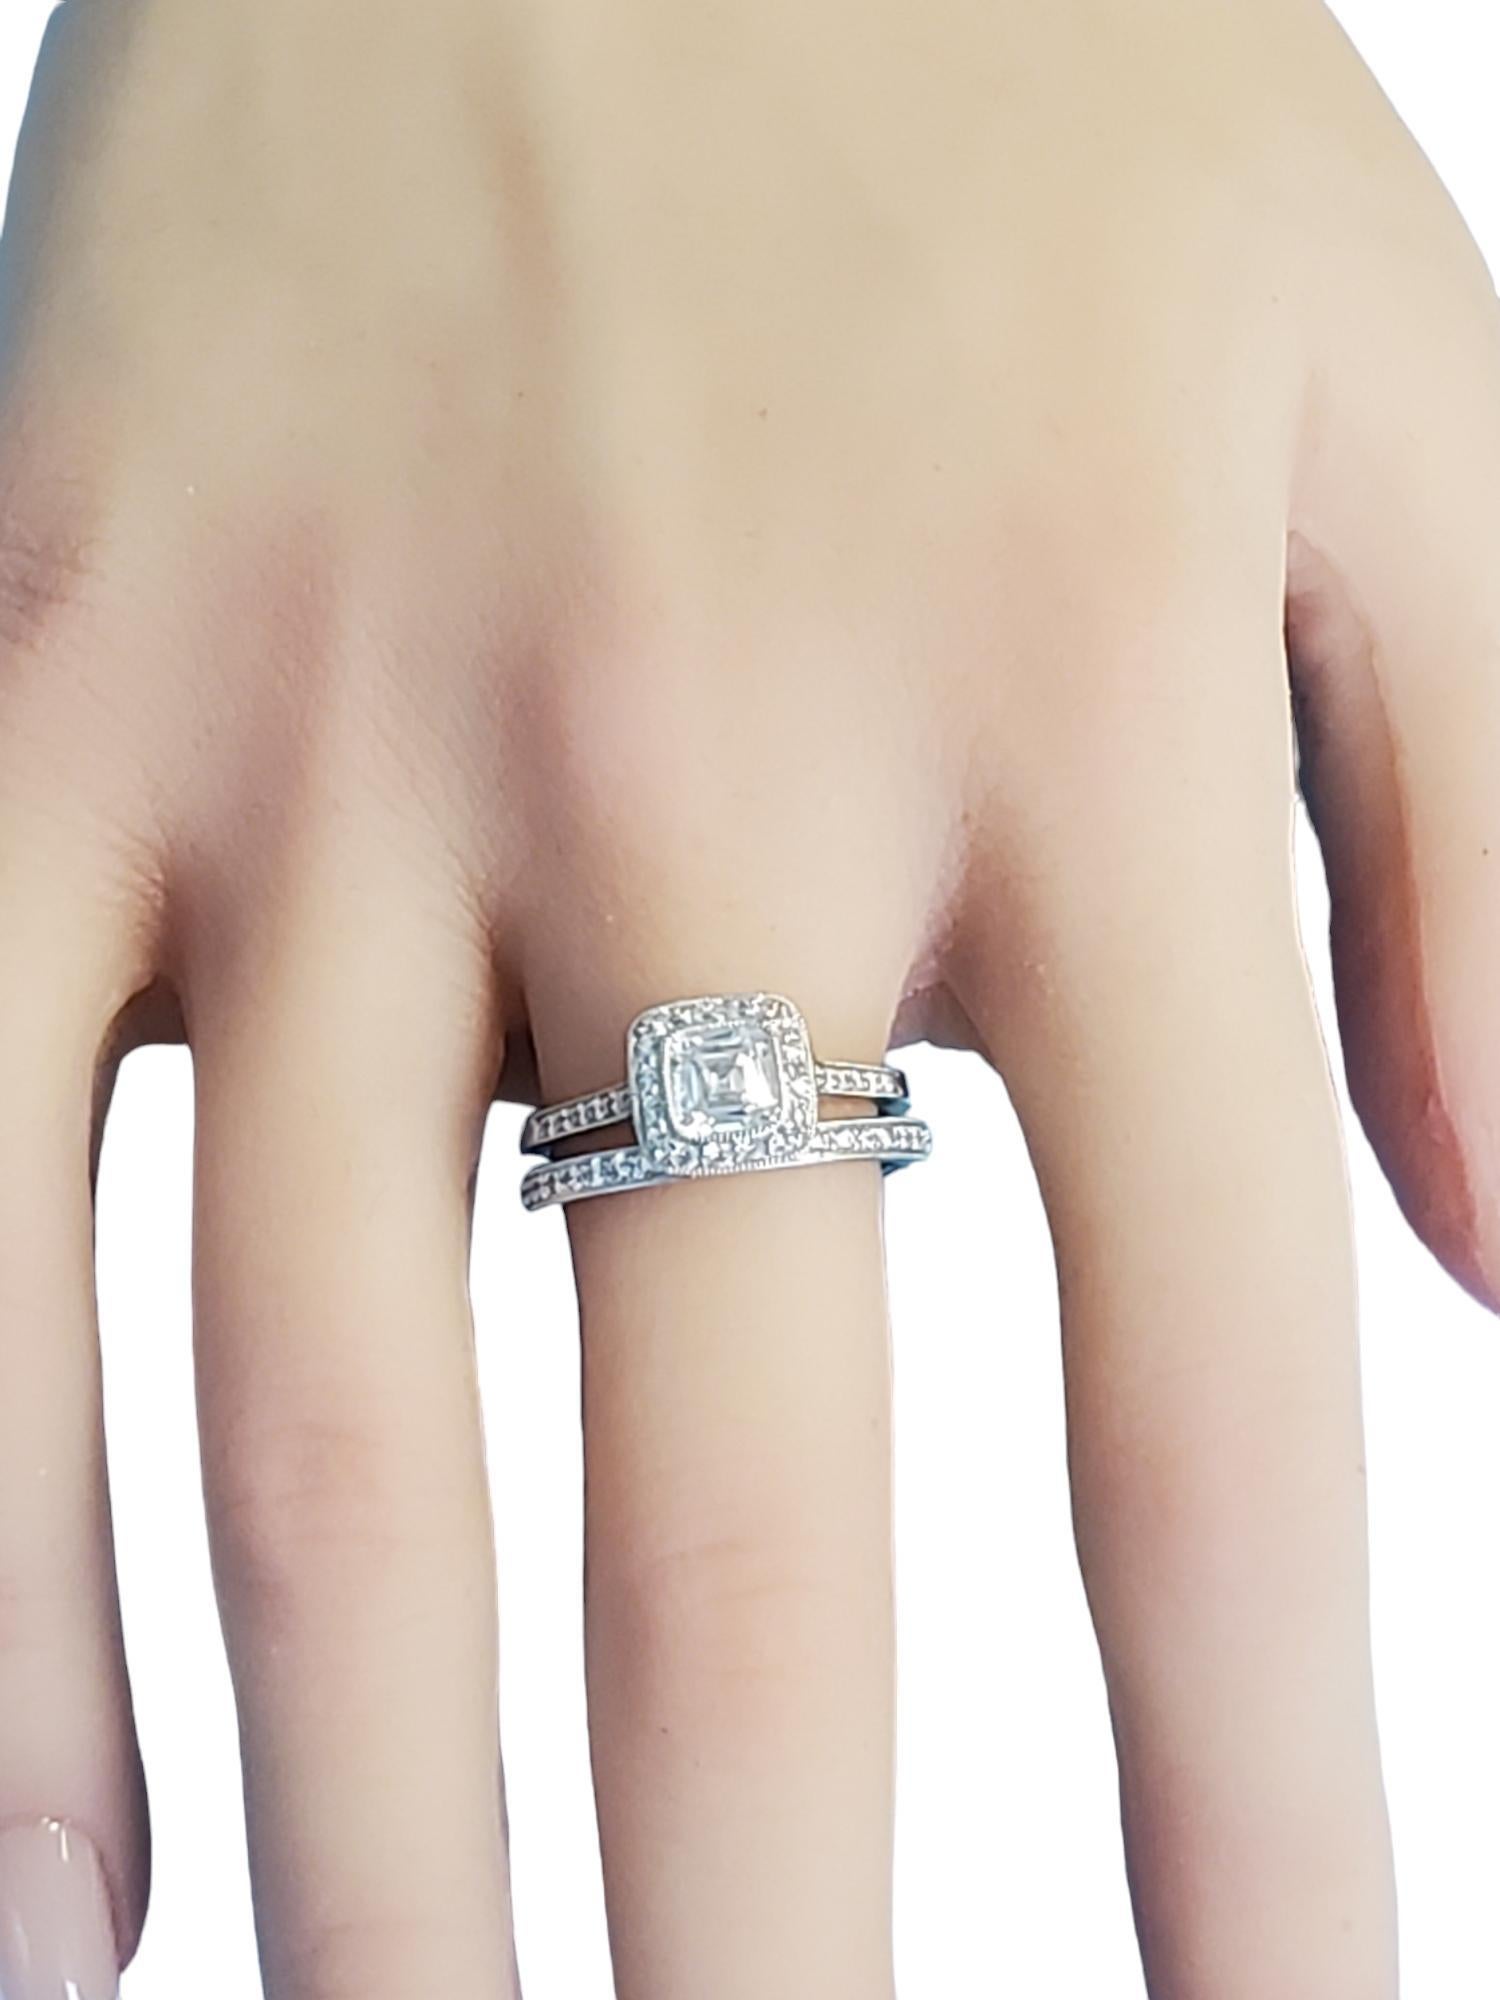 Listed is a Tiffany Co. platinum Legacy diamond engagement ring with a milgrain2mm platinum diamond eternity band. The engagement ring is 1.32tcw with a 1.05ct F VS1 legacy cushion. The matching band is 2mm wide in platinum and has .36tcw colorless